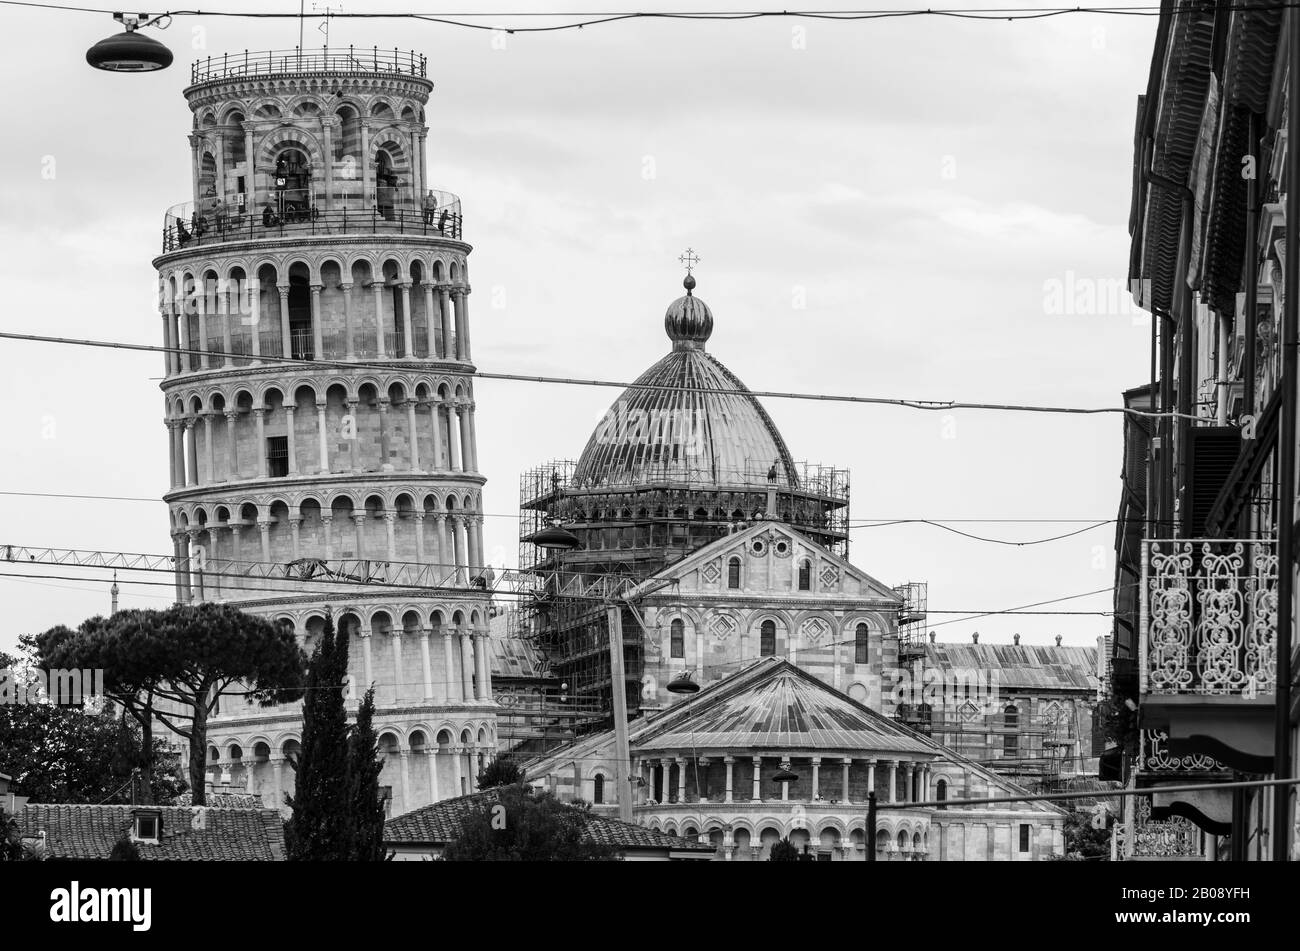 The Leaning Tower of Pisa in Black and White, in Pisa, Tuscany, Italy. Stock Photo